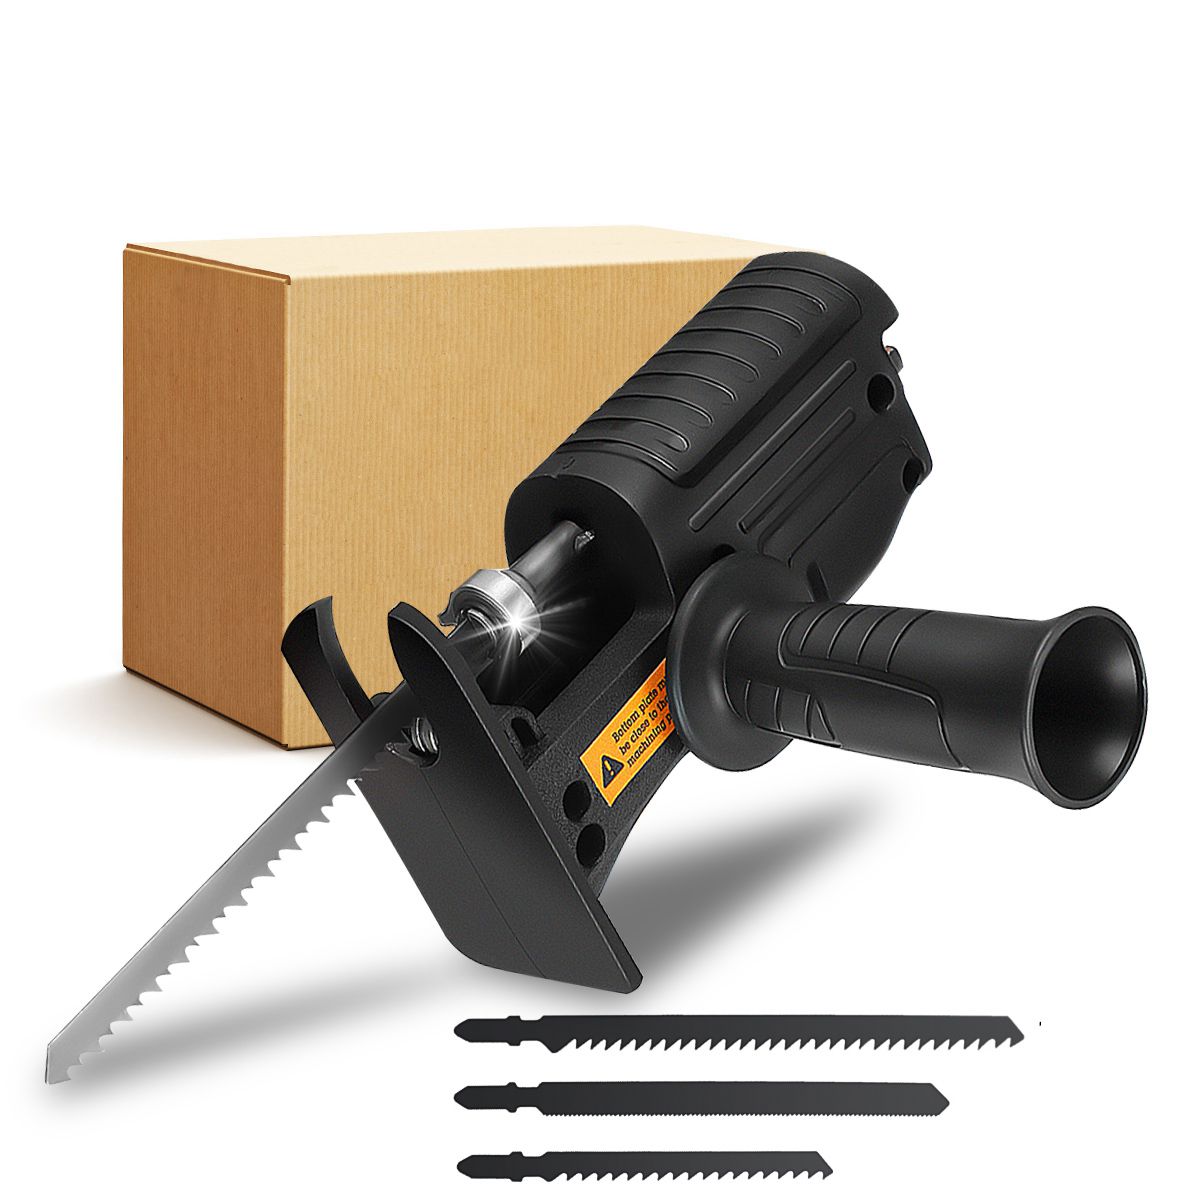 Find BLMIATKO Electric Drill Modified To Electric Saws Reciprocating Saw Adapter Accessory with Sawblade Power Tool Saws Drill to Jig Saws for Sale on Gipsybee.com with cryptocurrencies